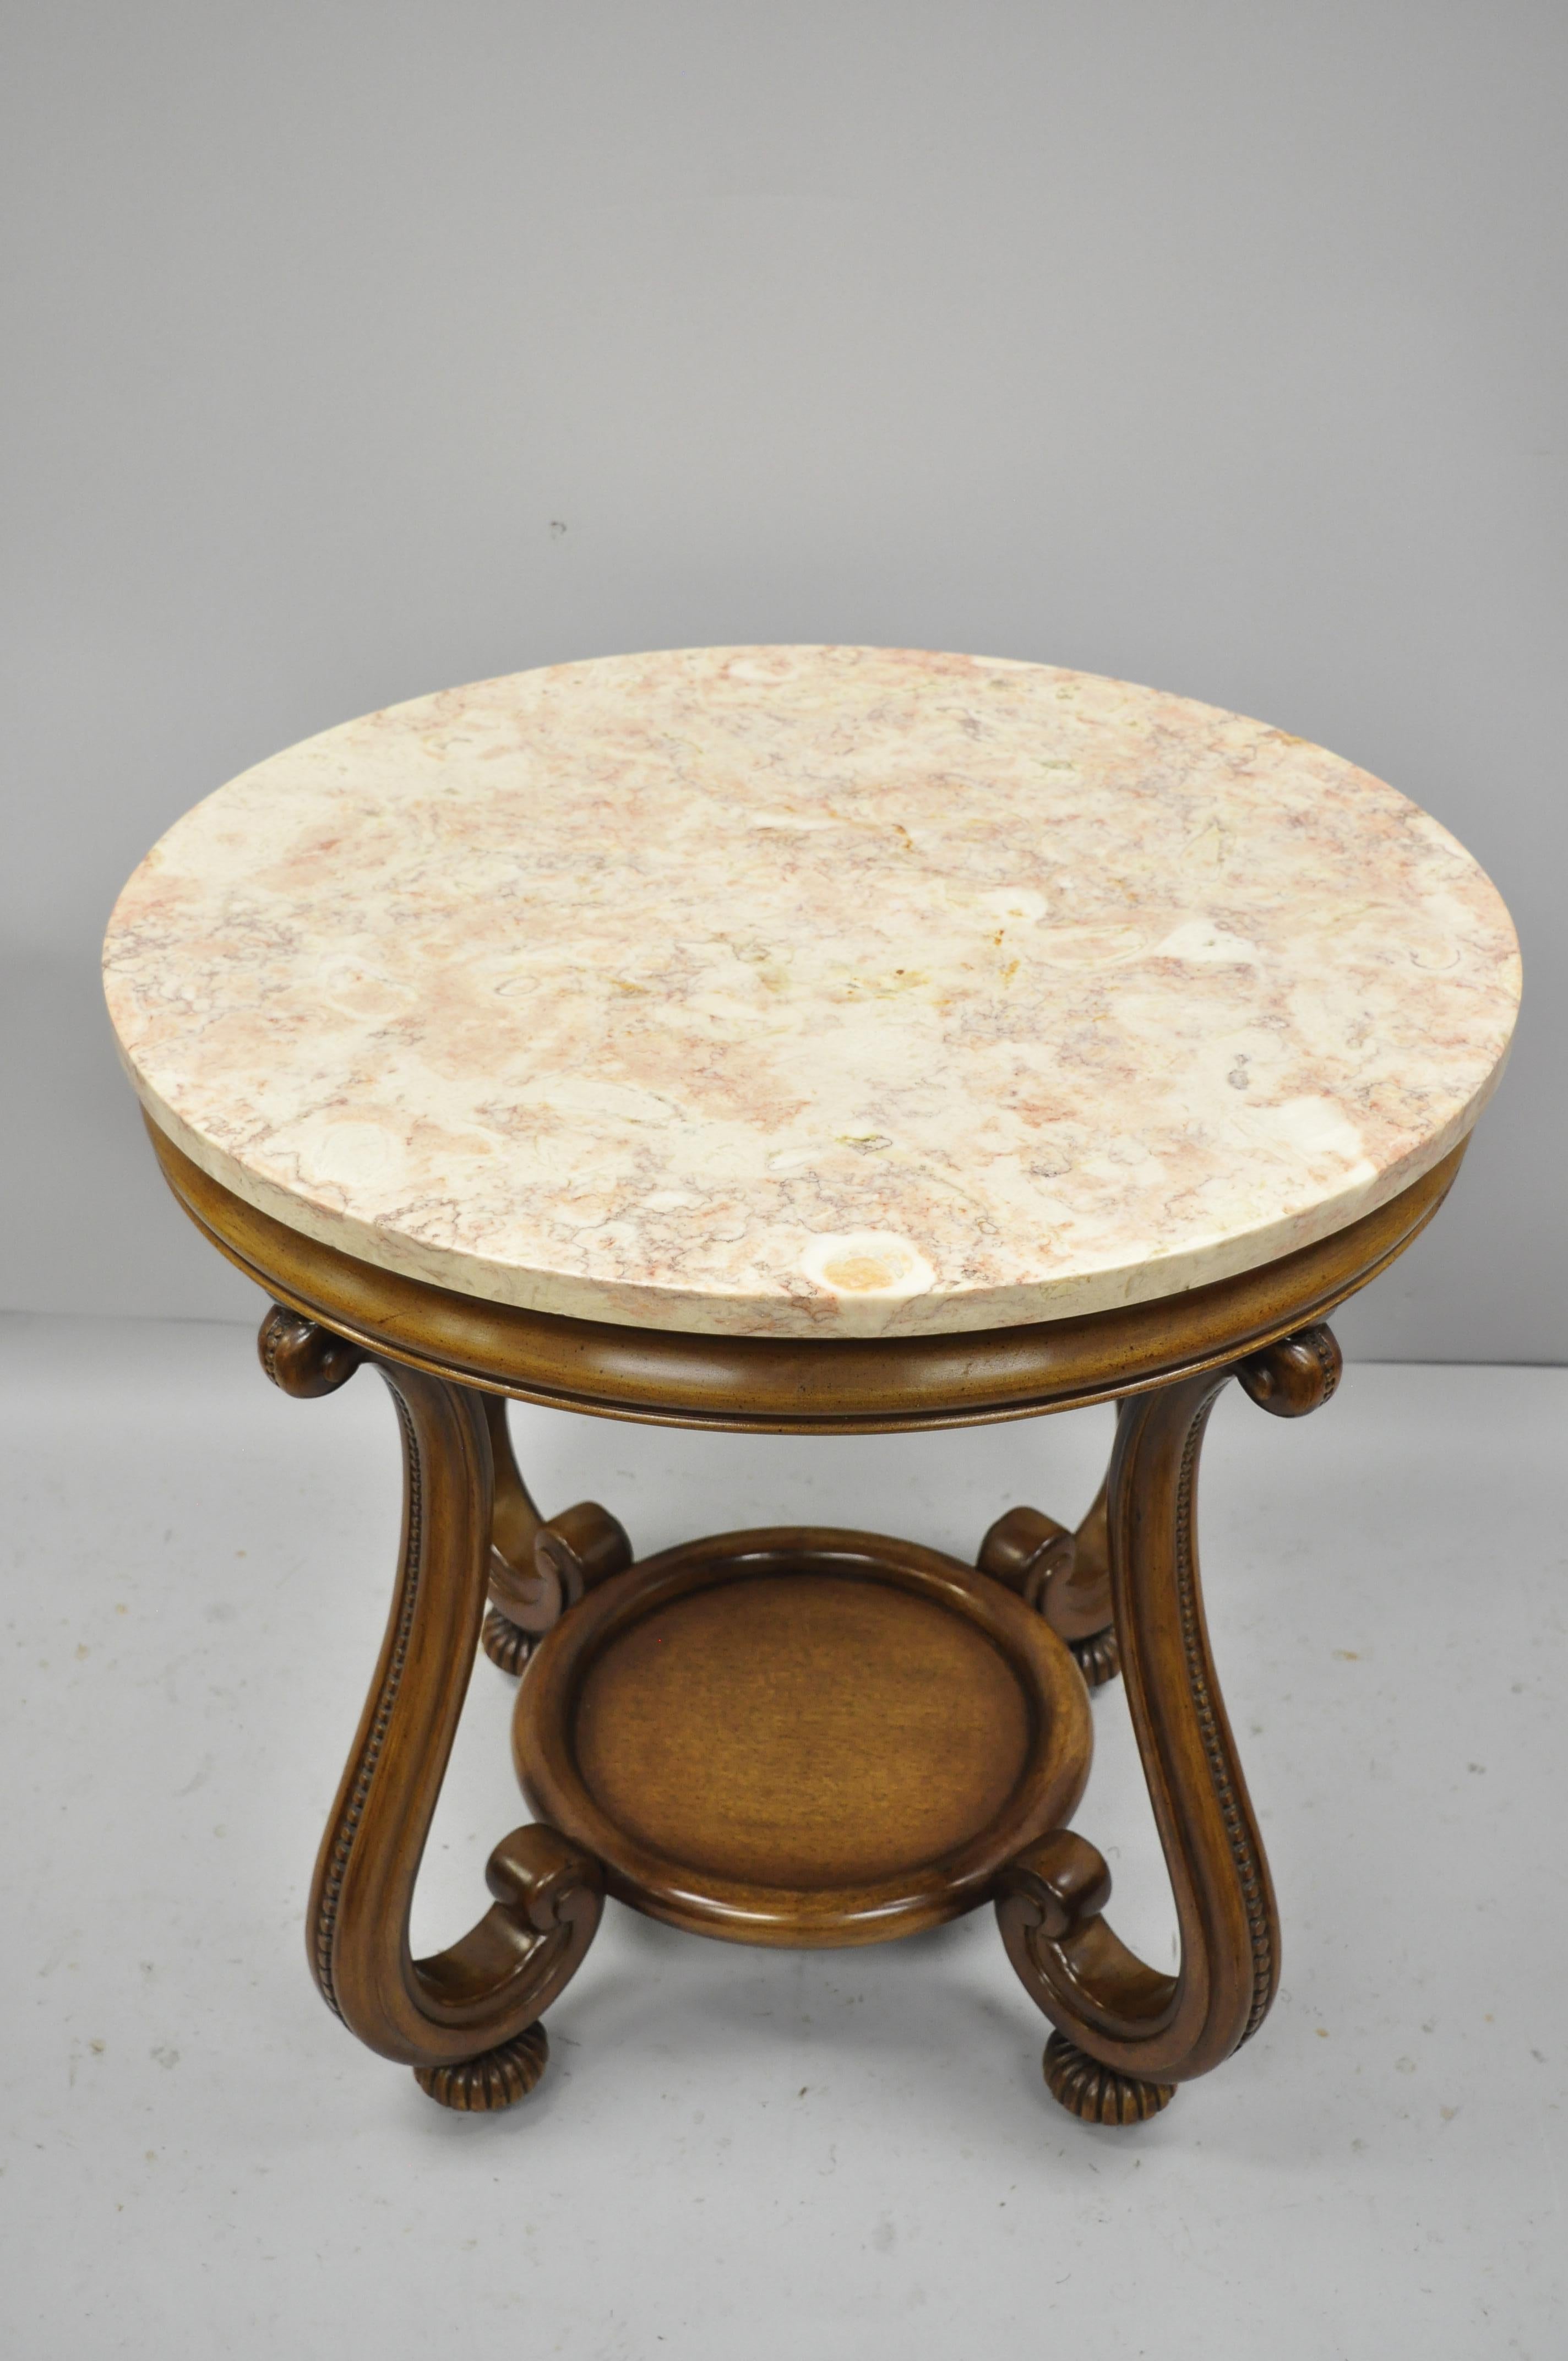 Vintage Hollywood Regency French style pink marble-top round side table. Item features solid mahogany base, lower shelf, rollings casters, pink marble top, circa 1950. Measurements: 27